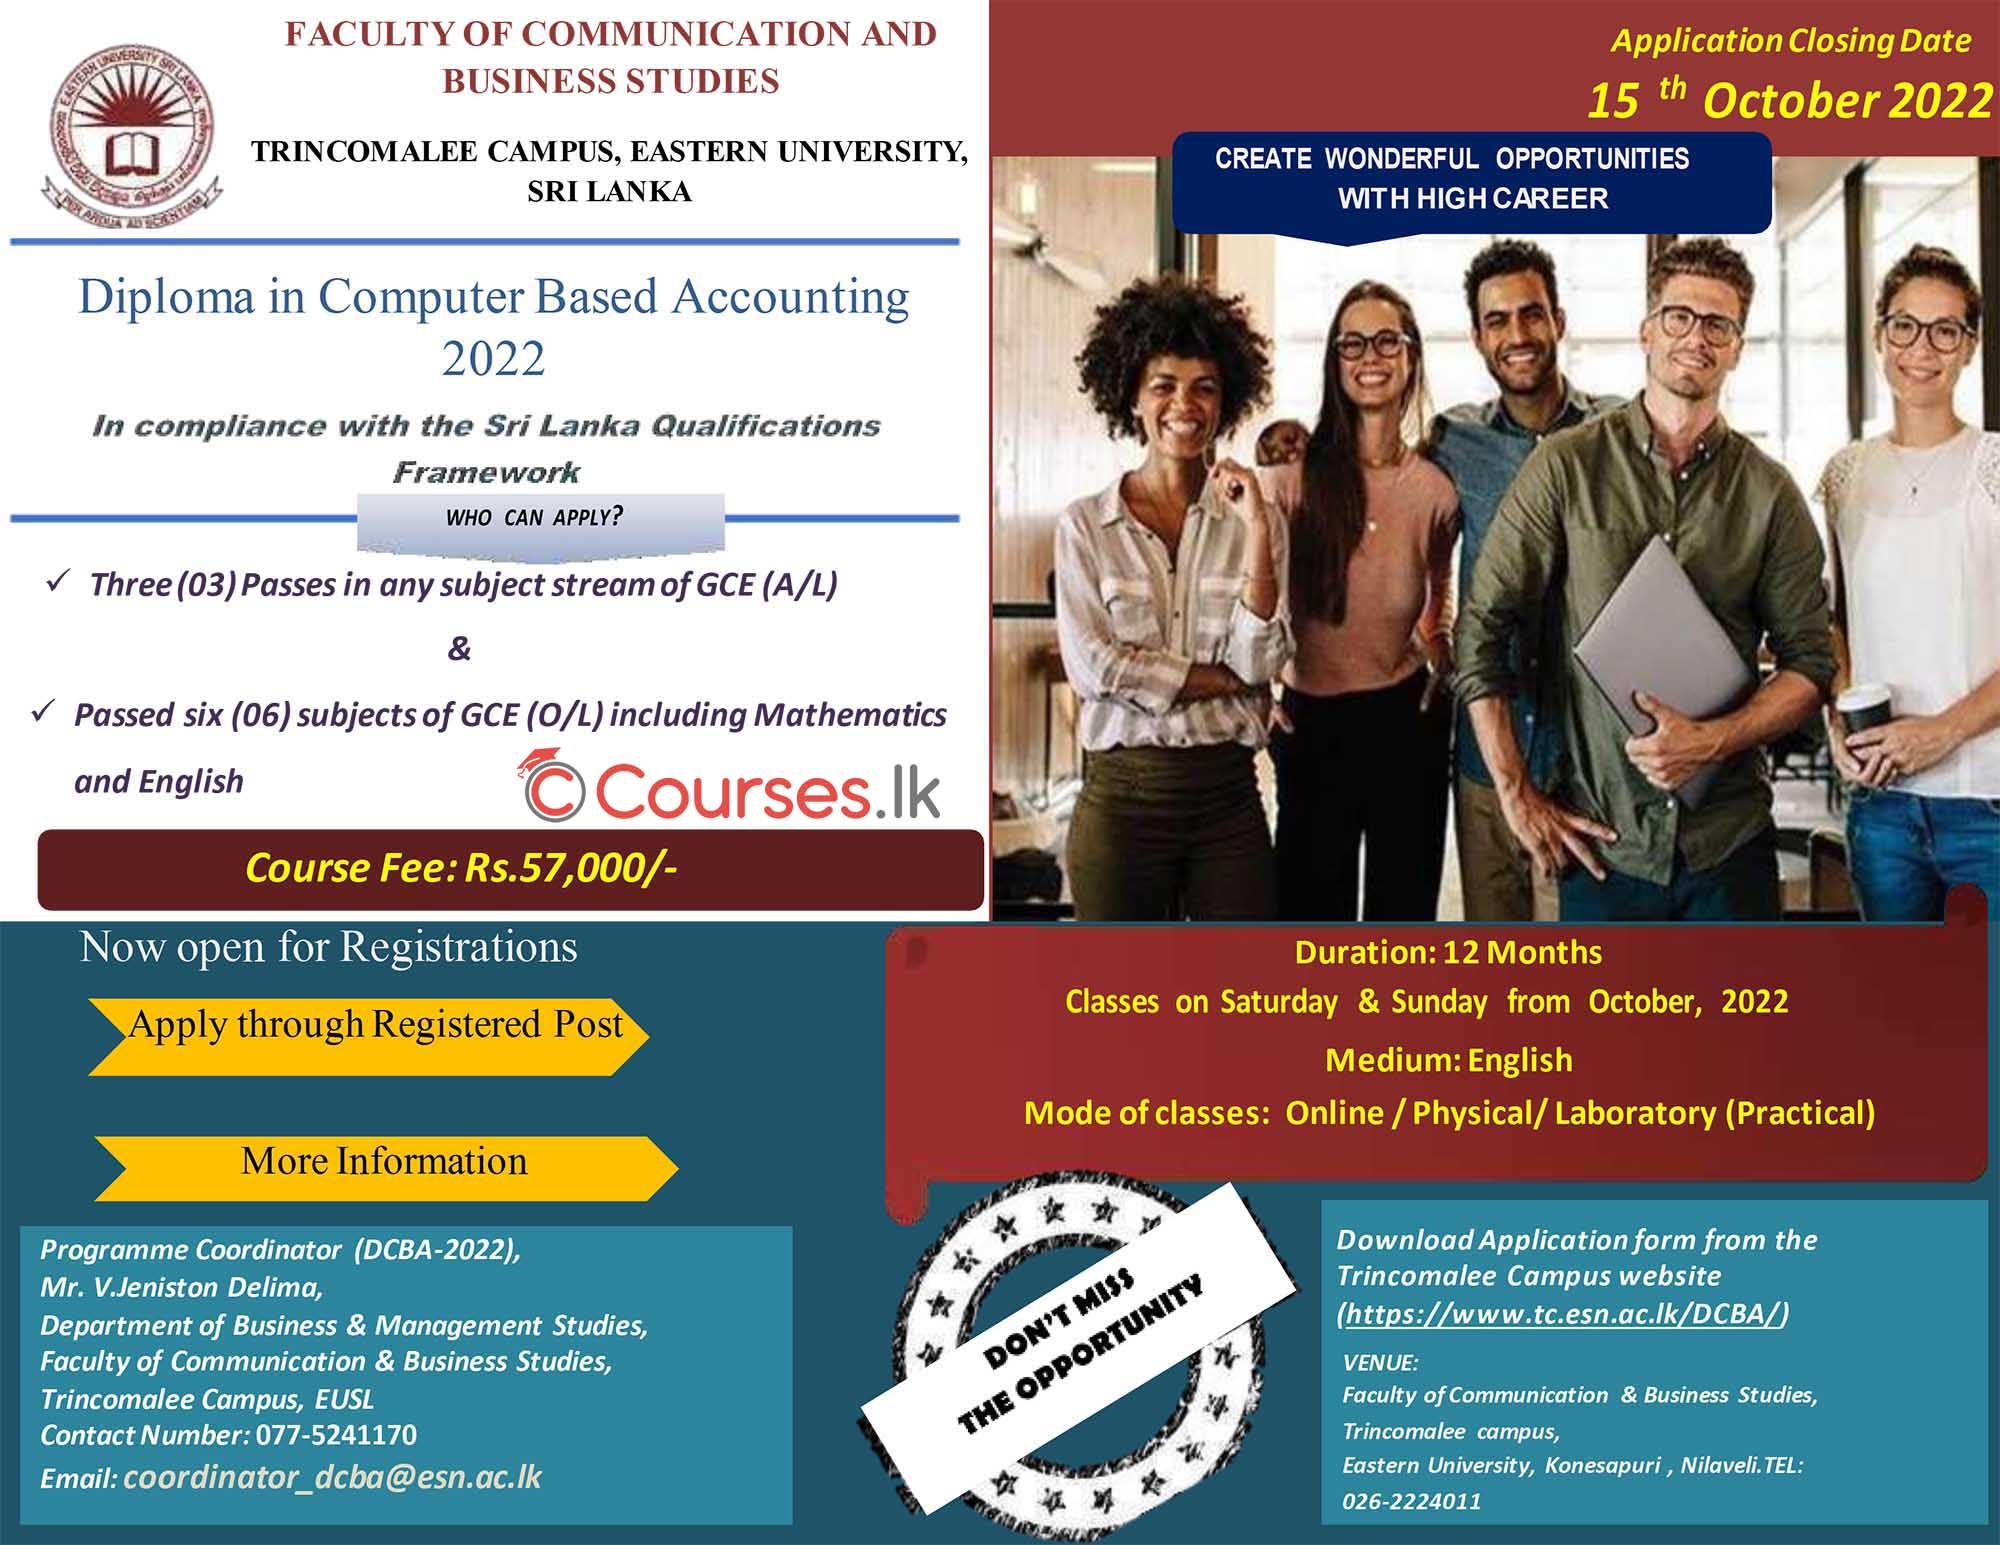 Diploma in Computer-Based Accounting 2022 - Eastern University (EUSL)